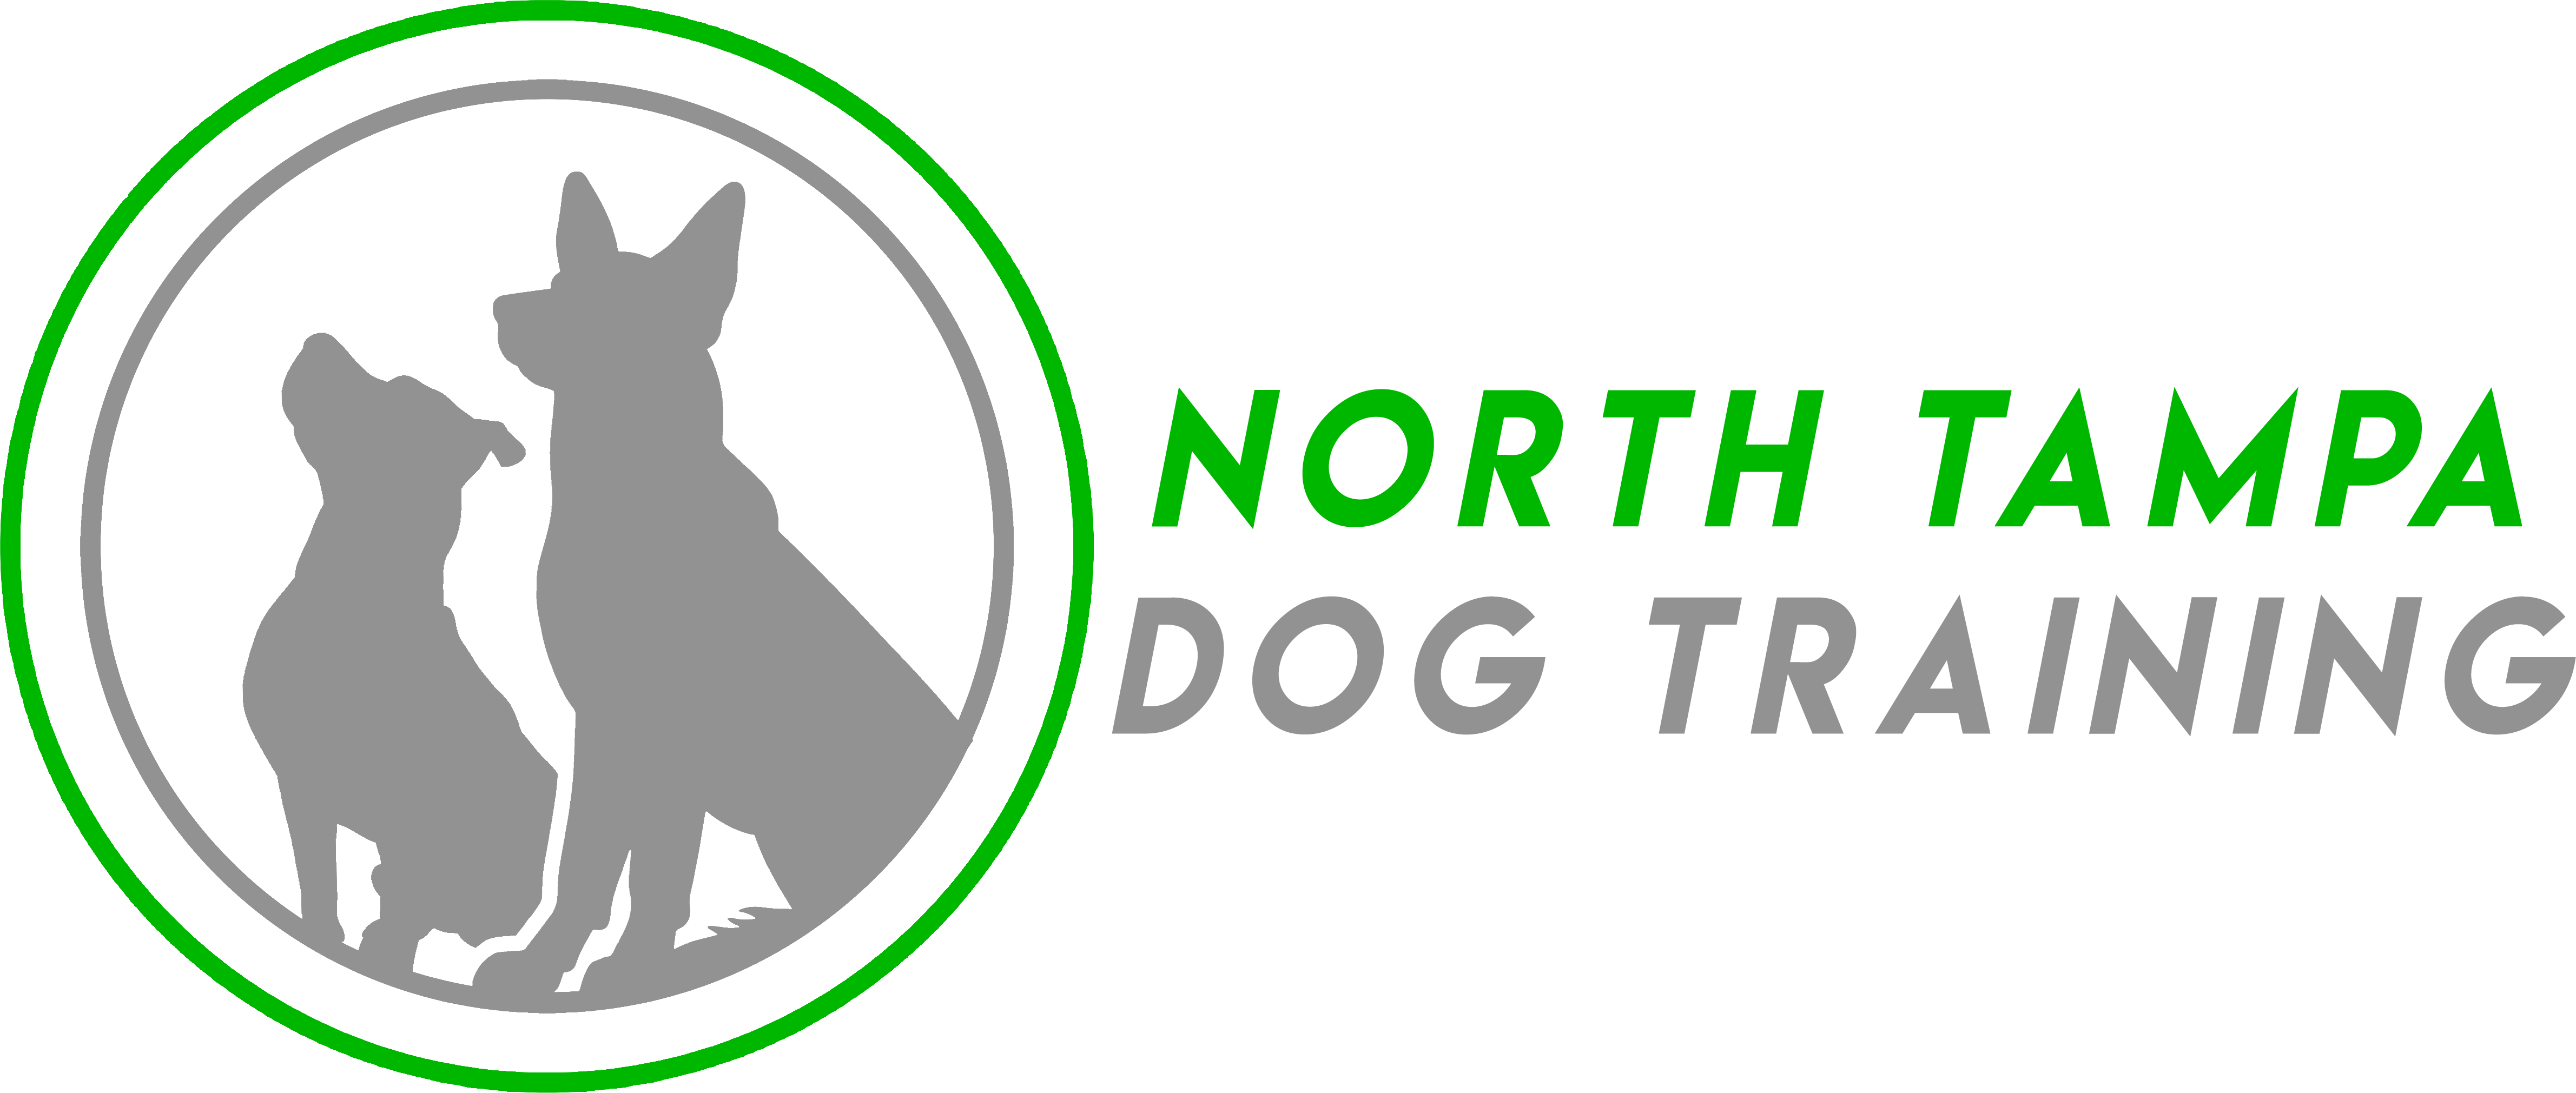 North Tampa Dog Training serving Tampa, Trinity, and Odessa, FL